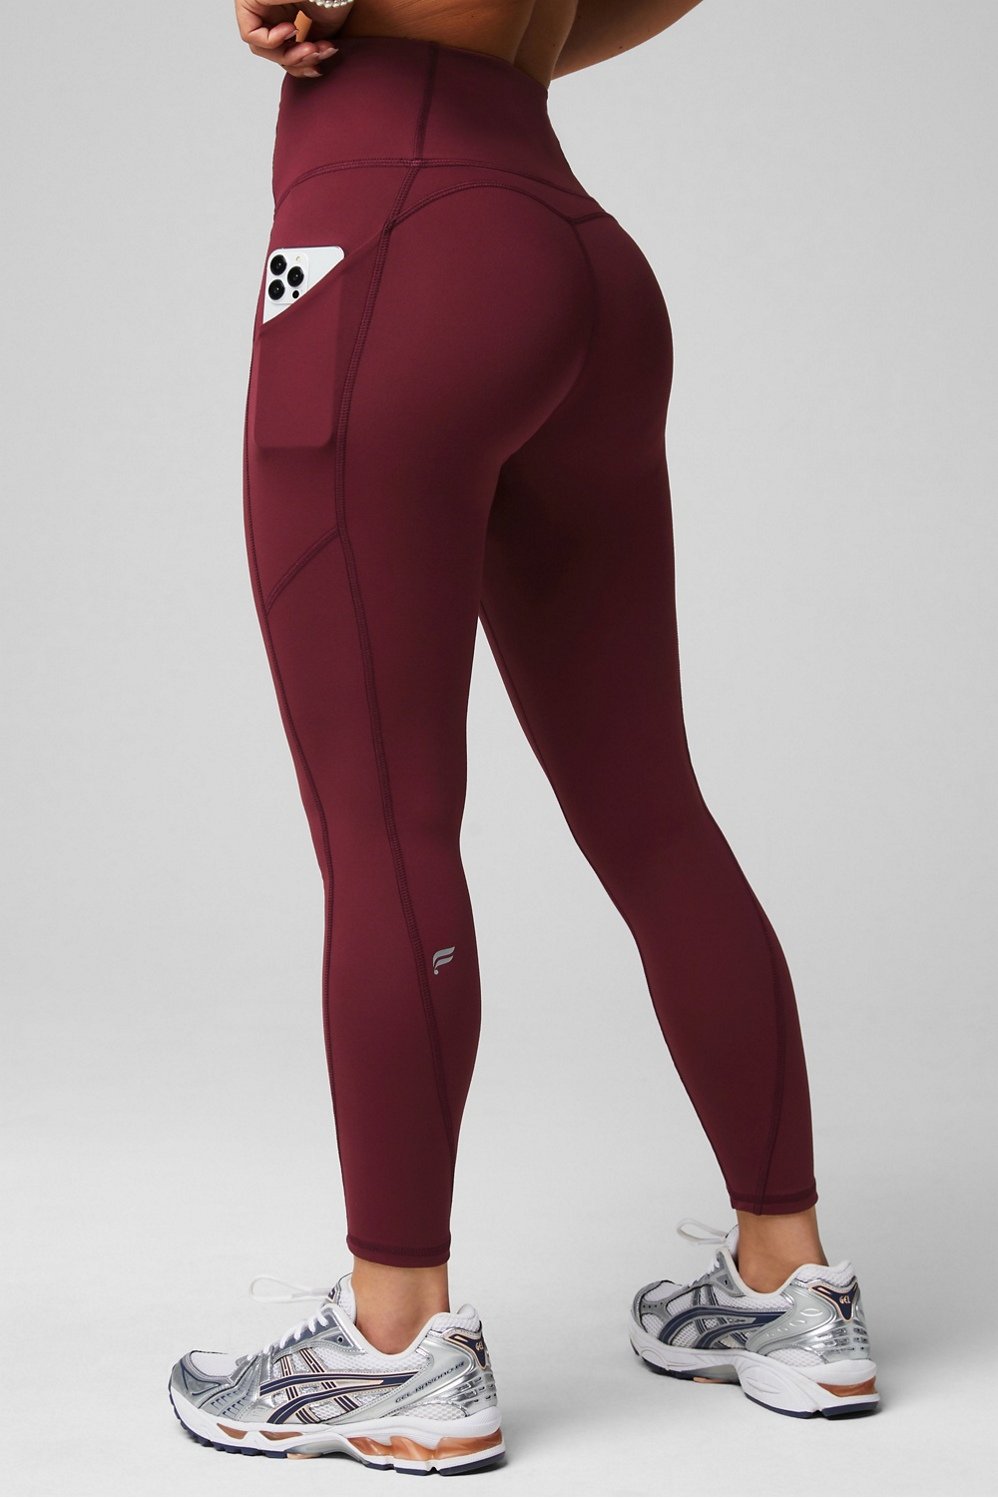 Fabletics pure lux oasis high waisted leggings size small - $32 - From  Bailey